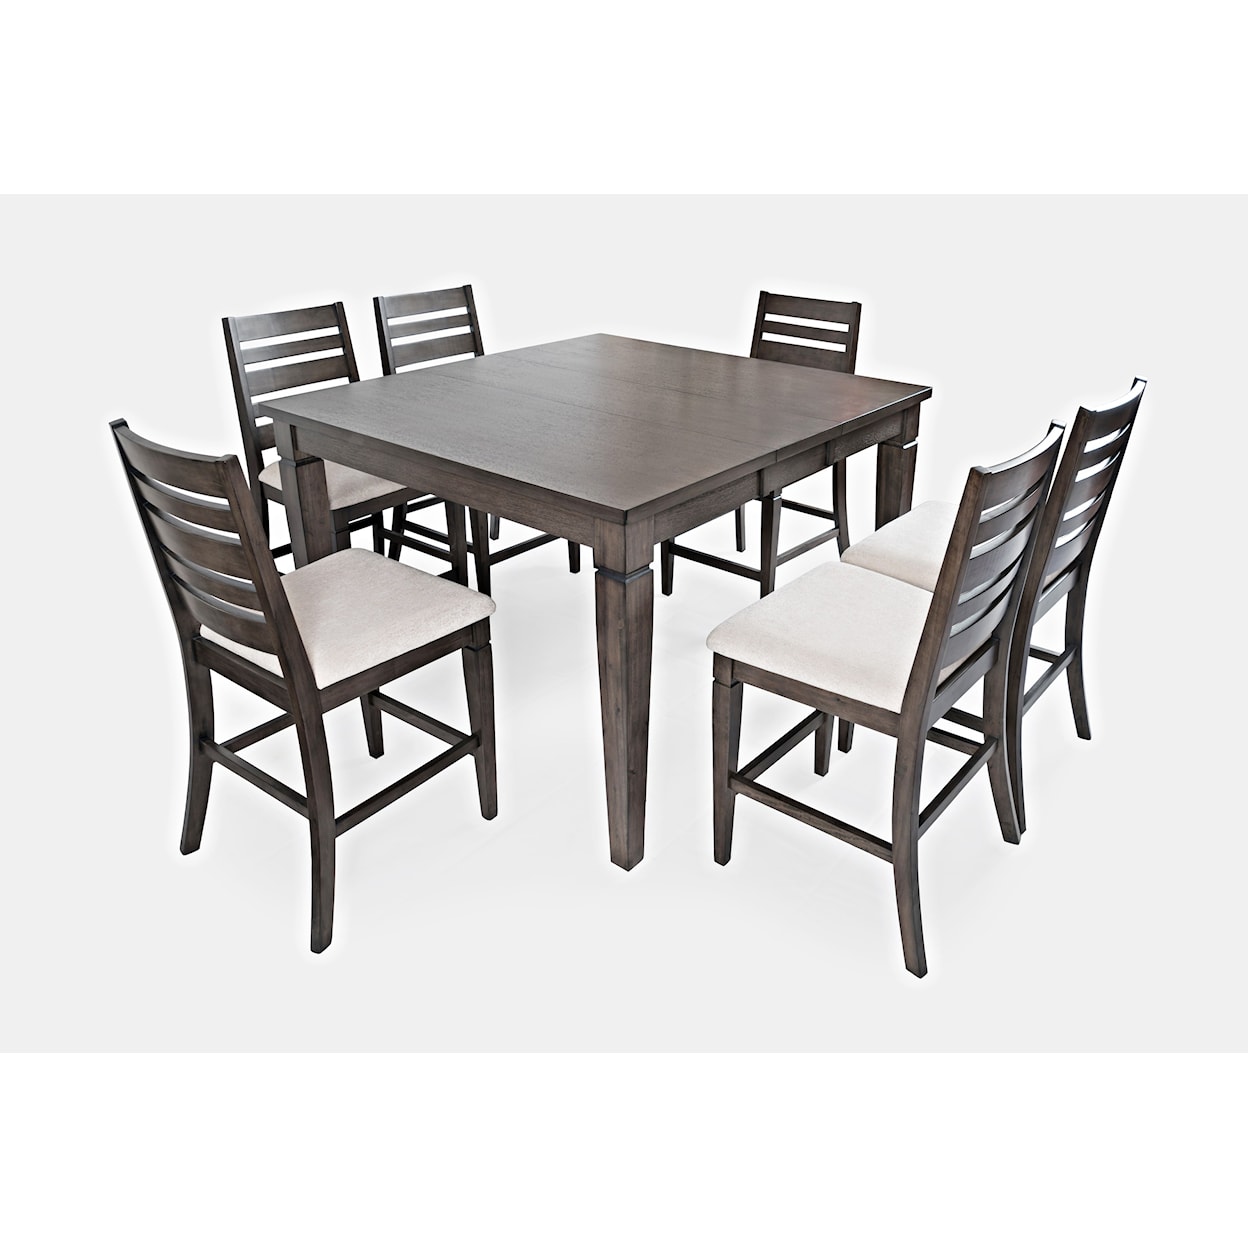 Jofran Lincoln Square 5pc Dining Room Group